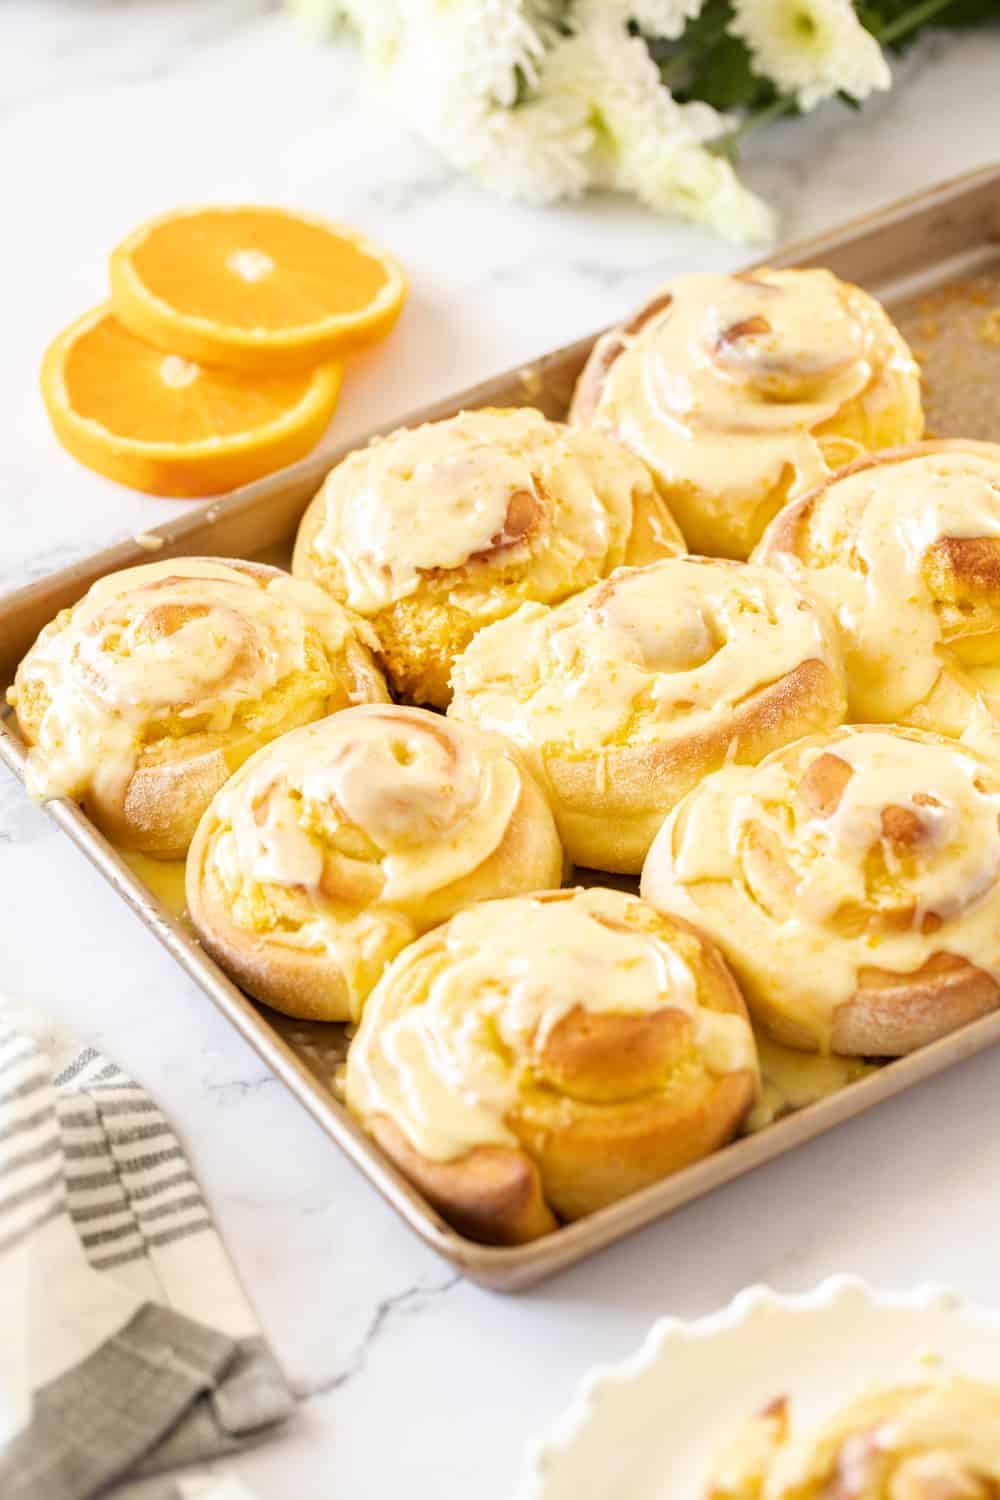 8 orange rolls on a gold baking tray with slices of orange in the background